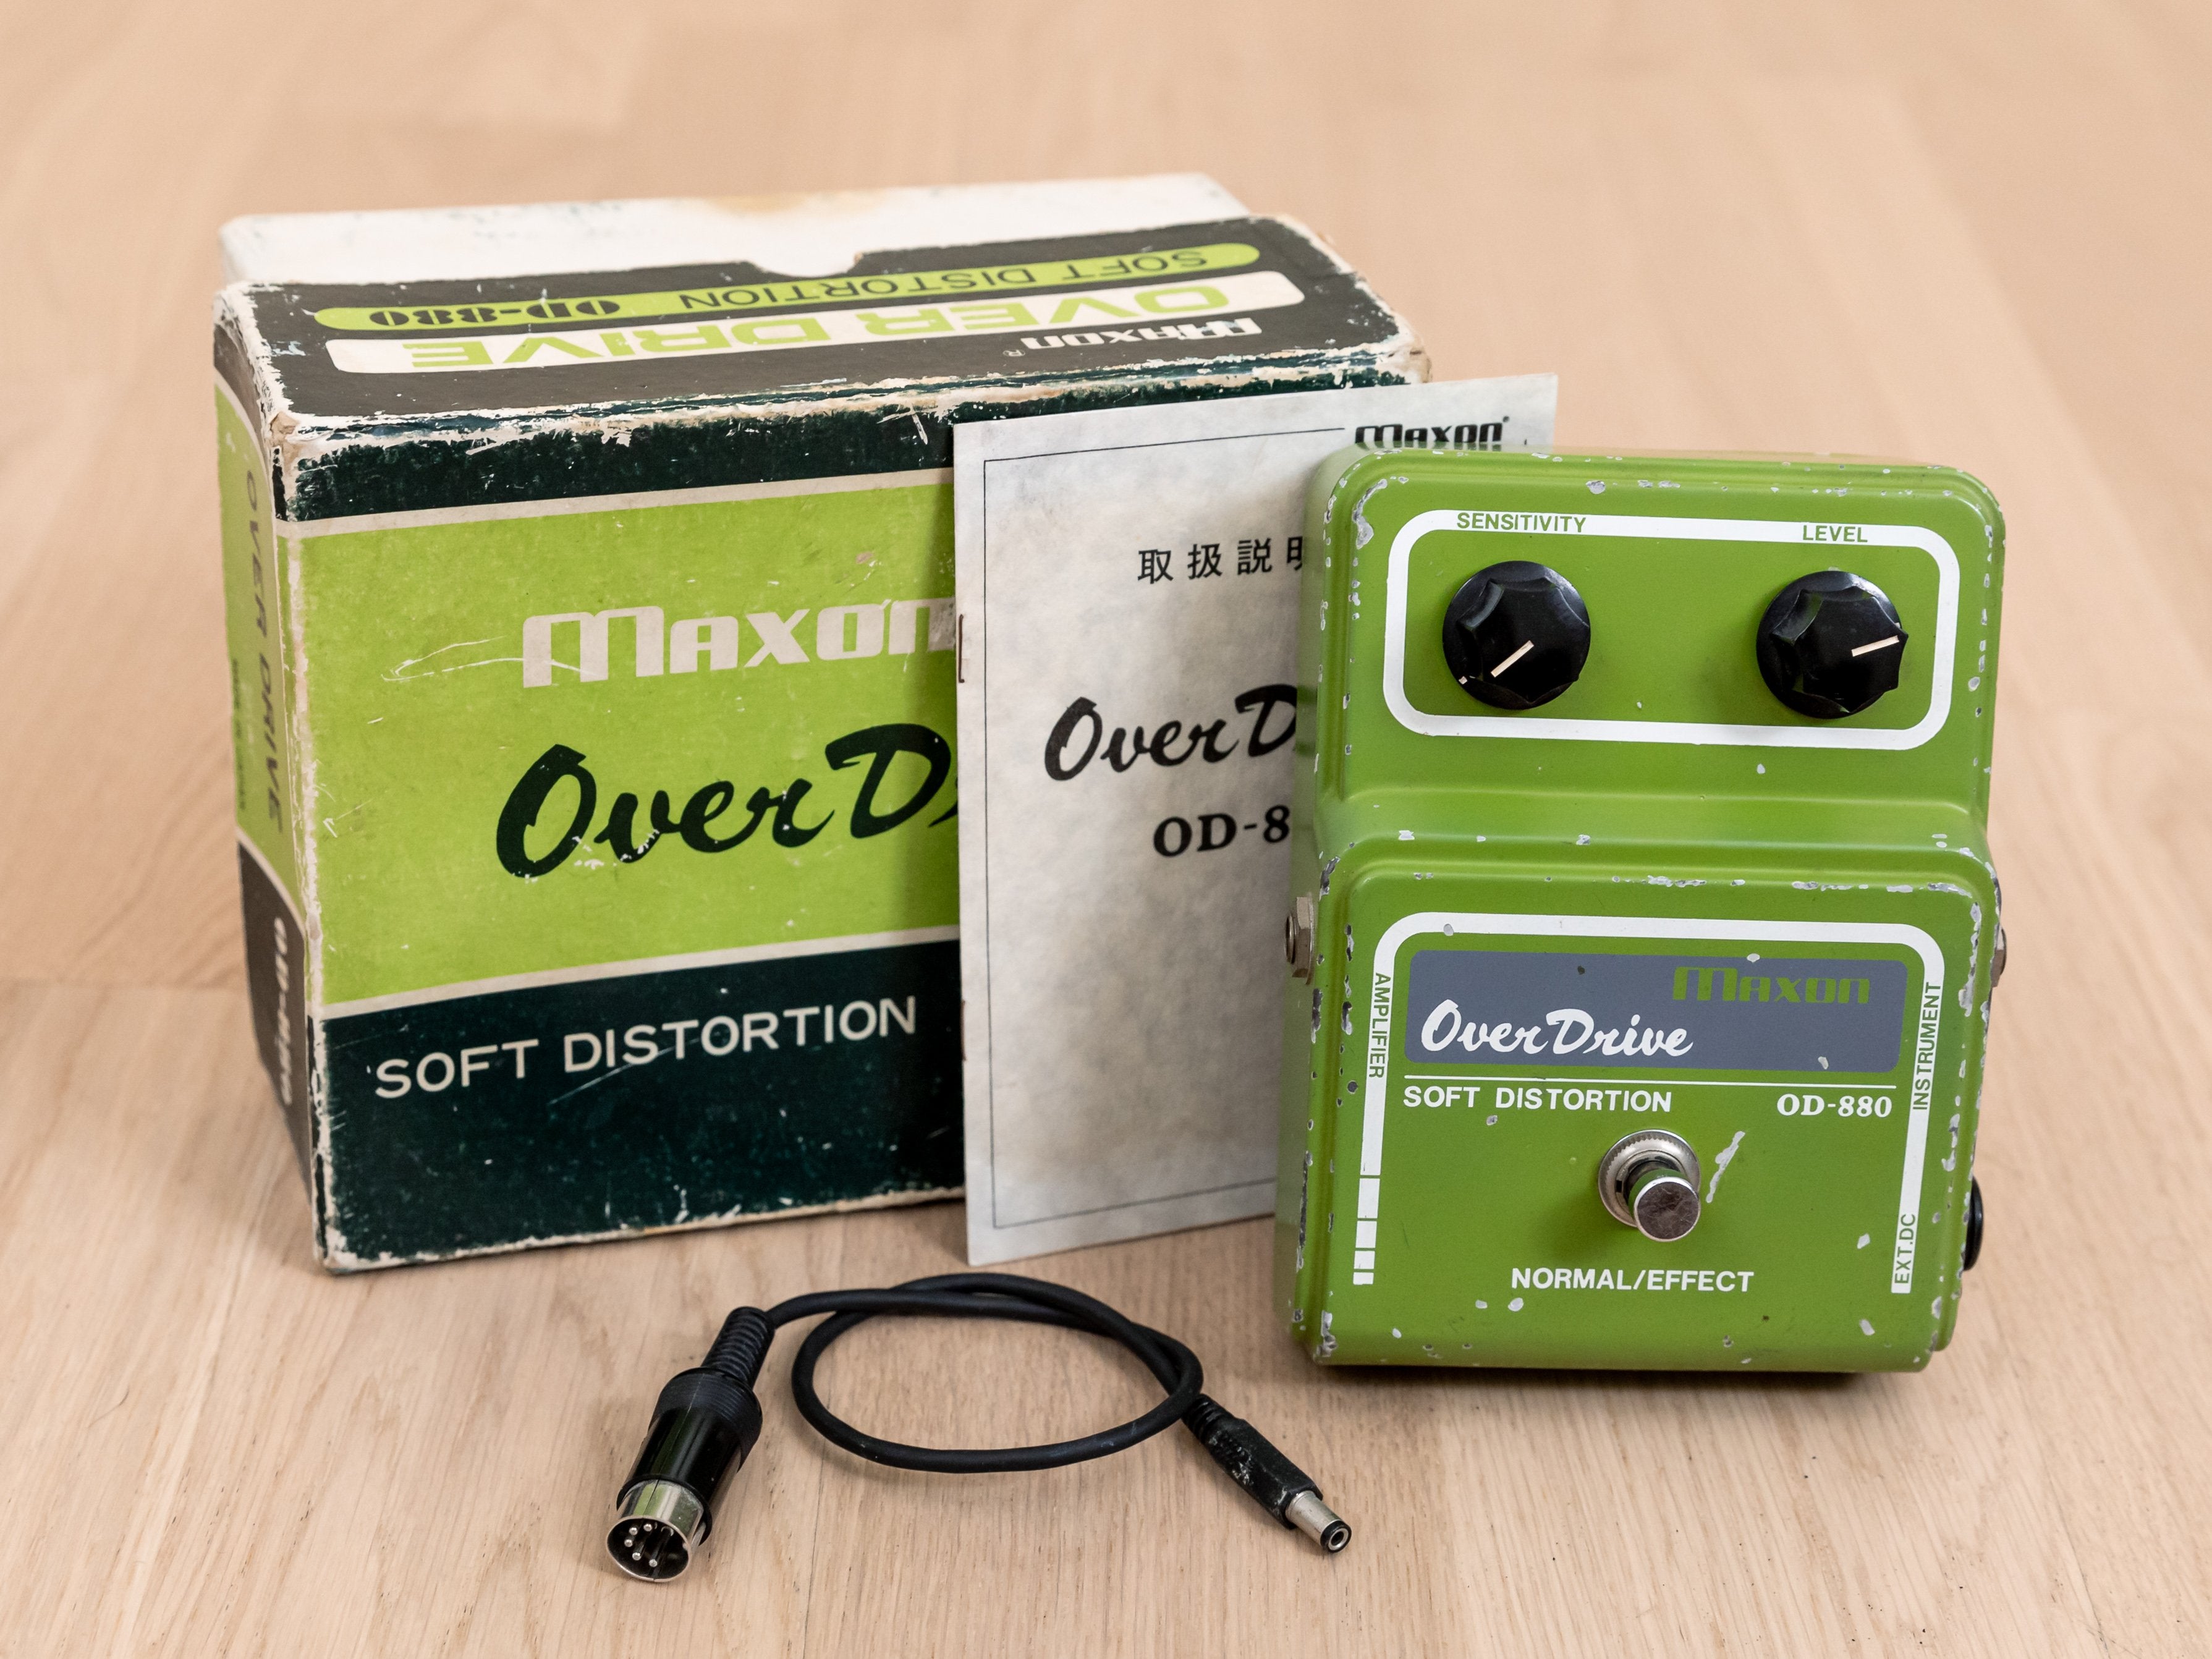 1977 Maxon OD-880 Soft Distortion Overdrive Vintage Guitar Effects Pedal w/ Box